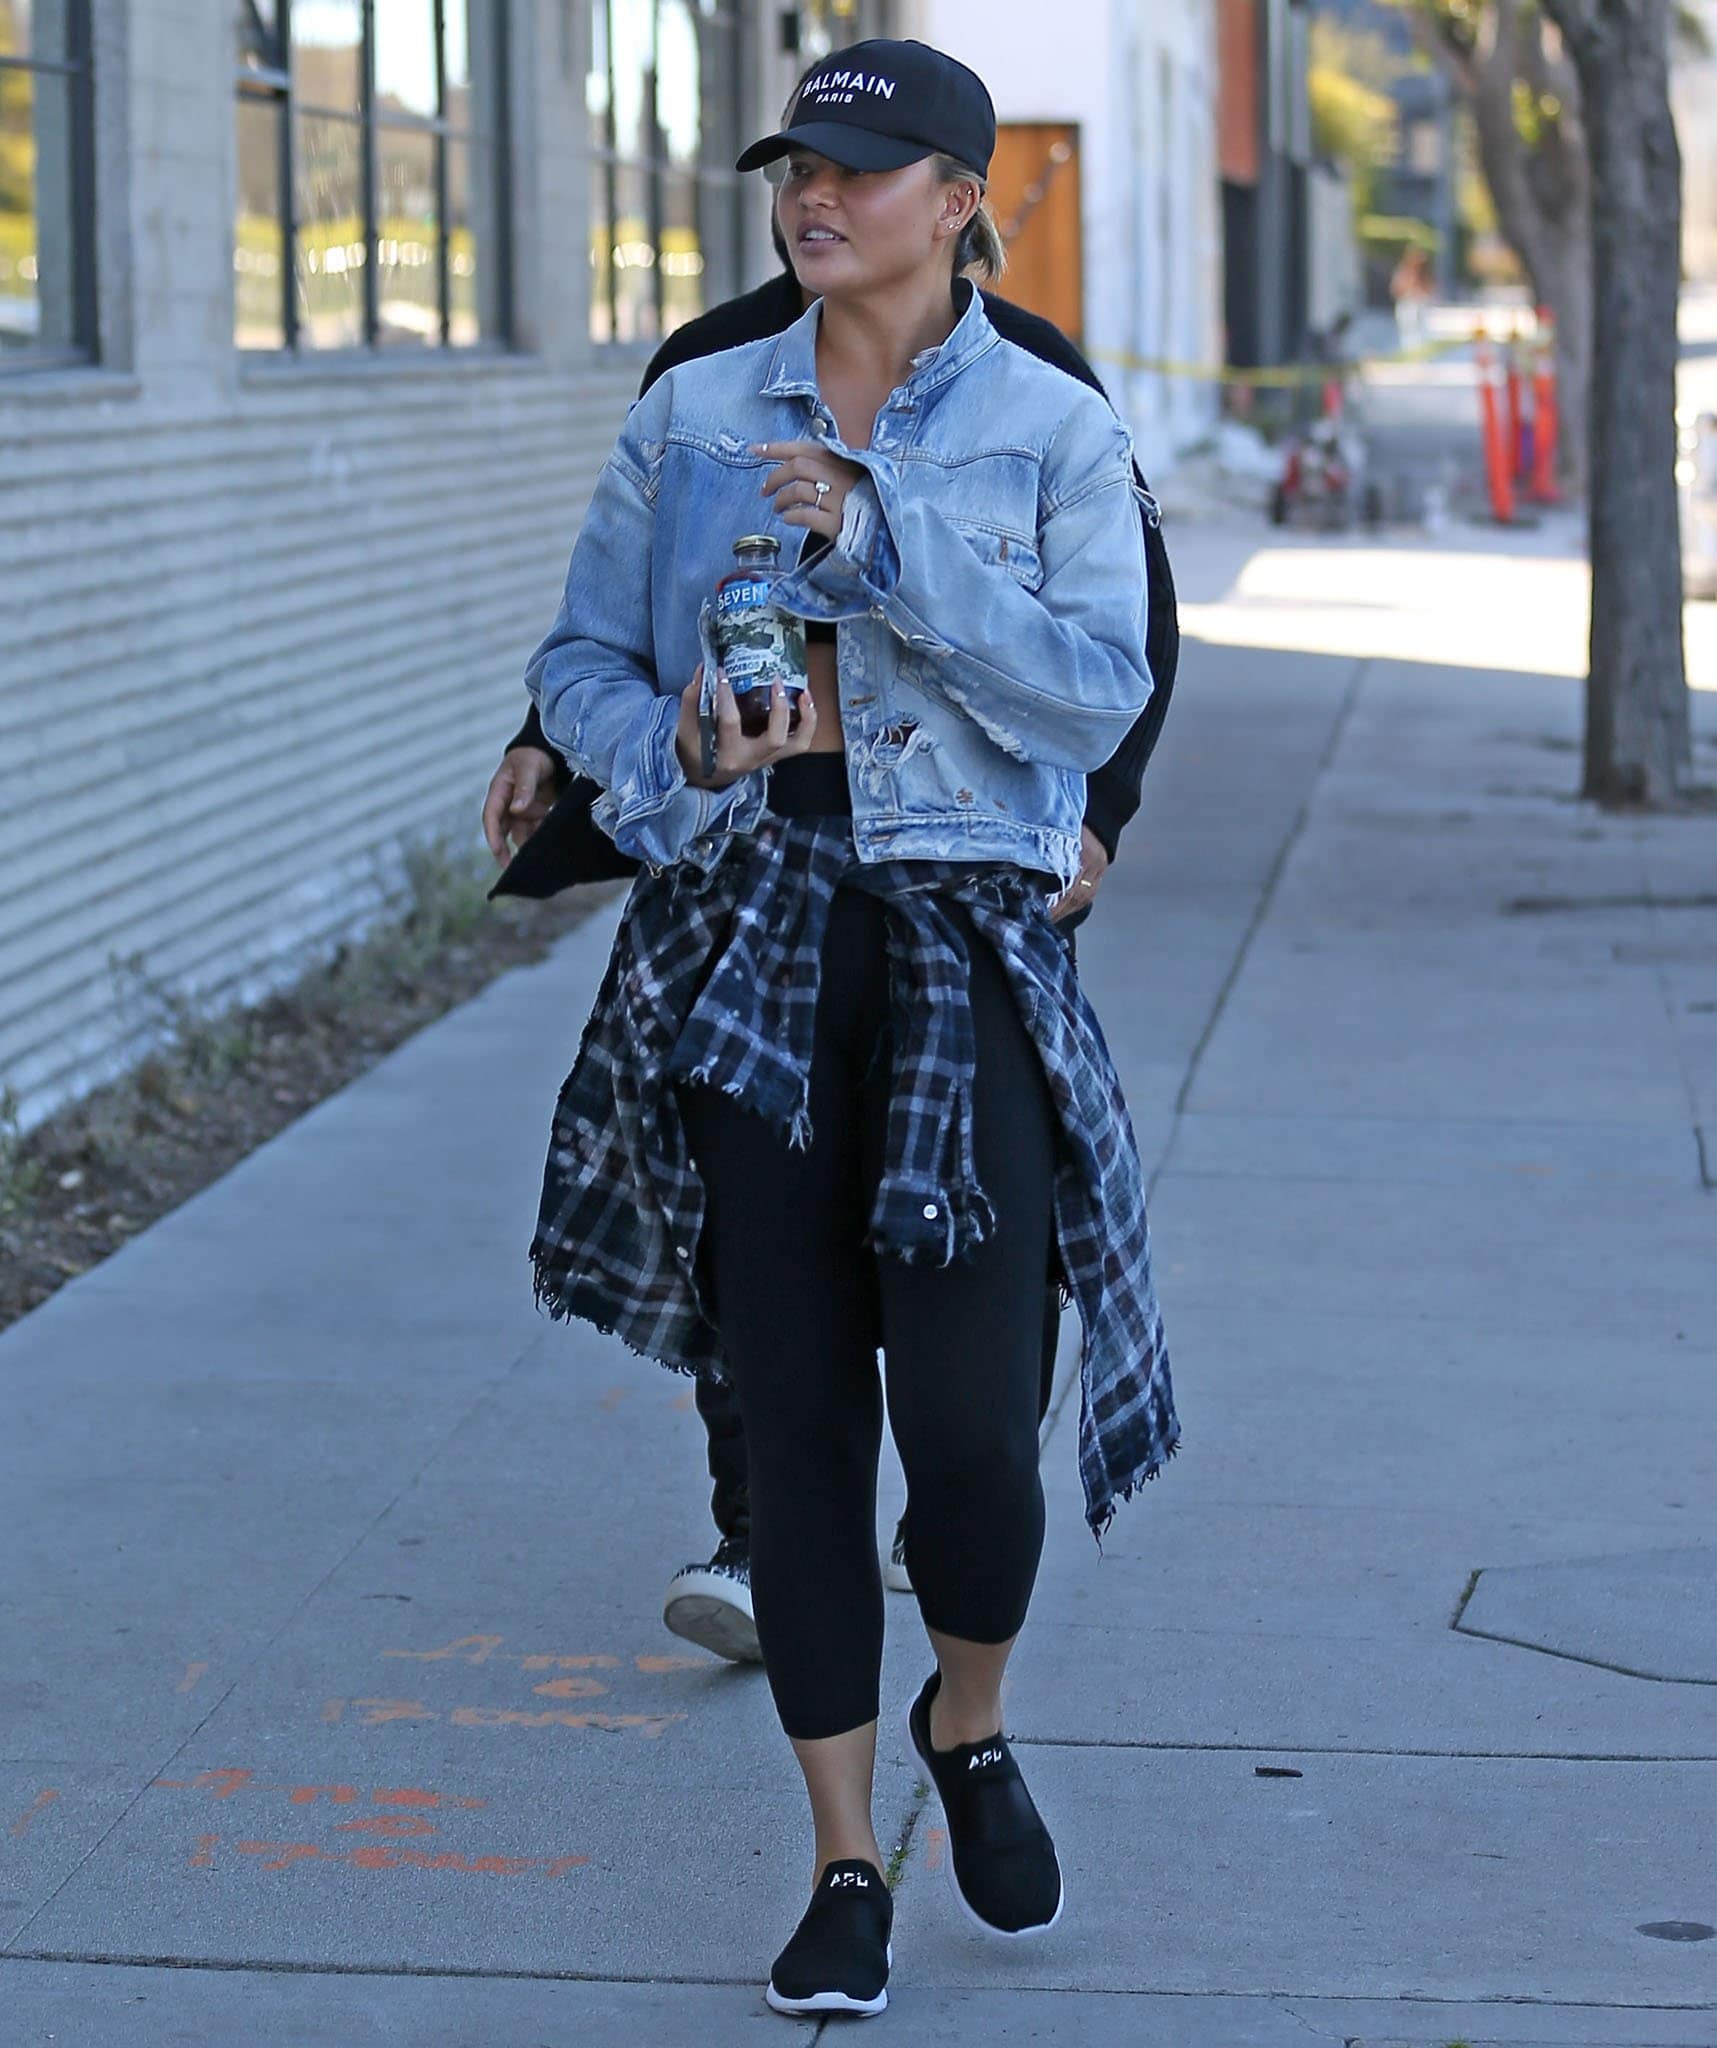 Chrissy Teigen gets sporty in bandeau top and leggings, styled with an R13 distressed denim jacket and a plaid shirt